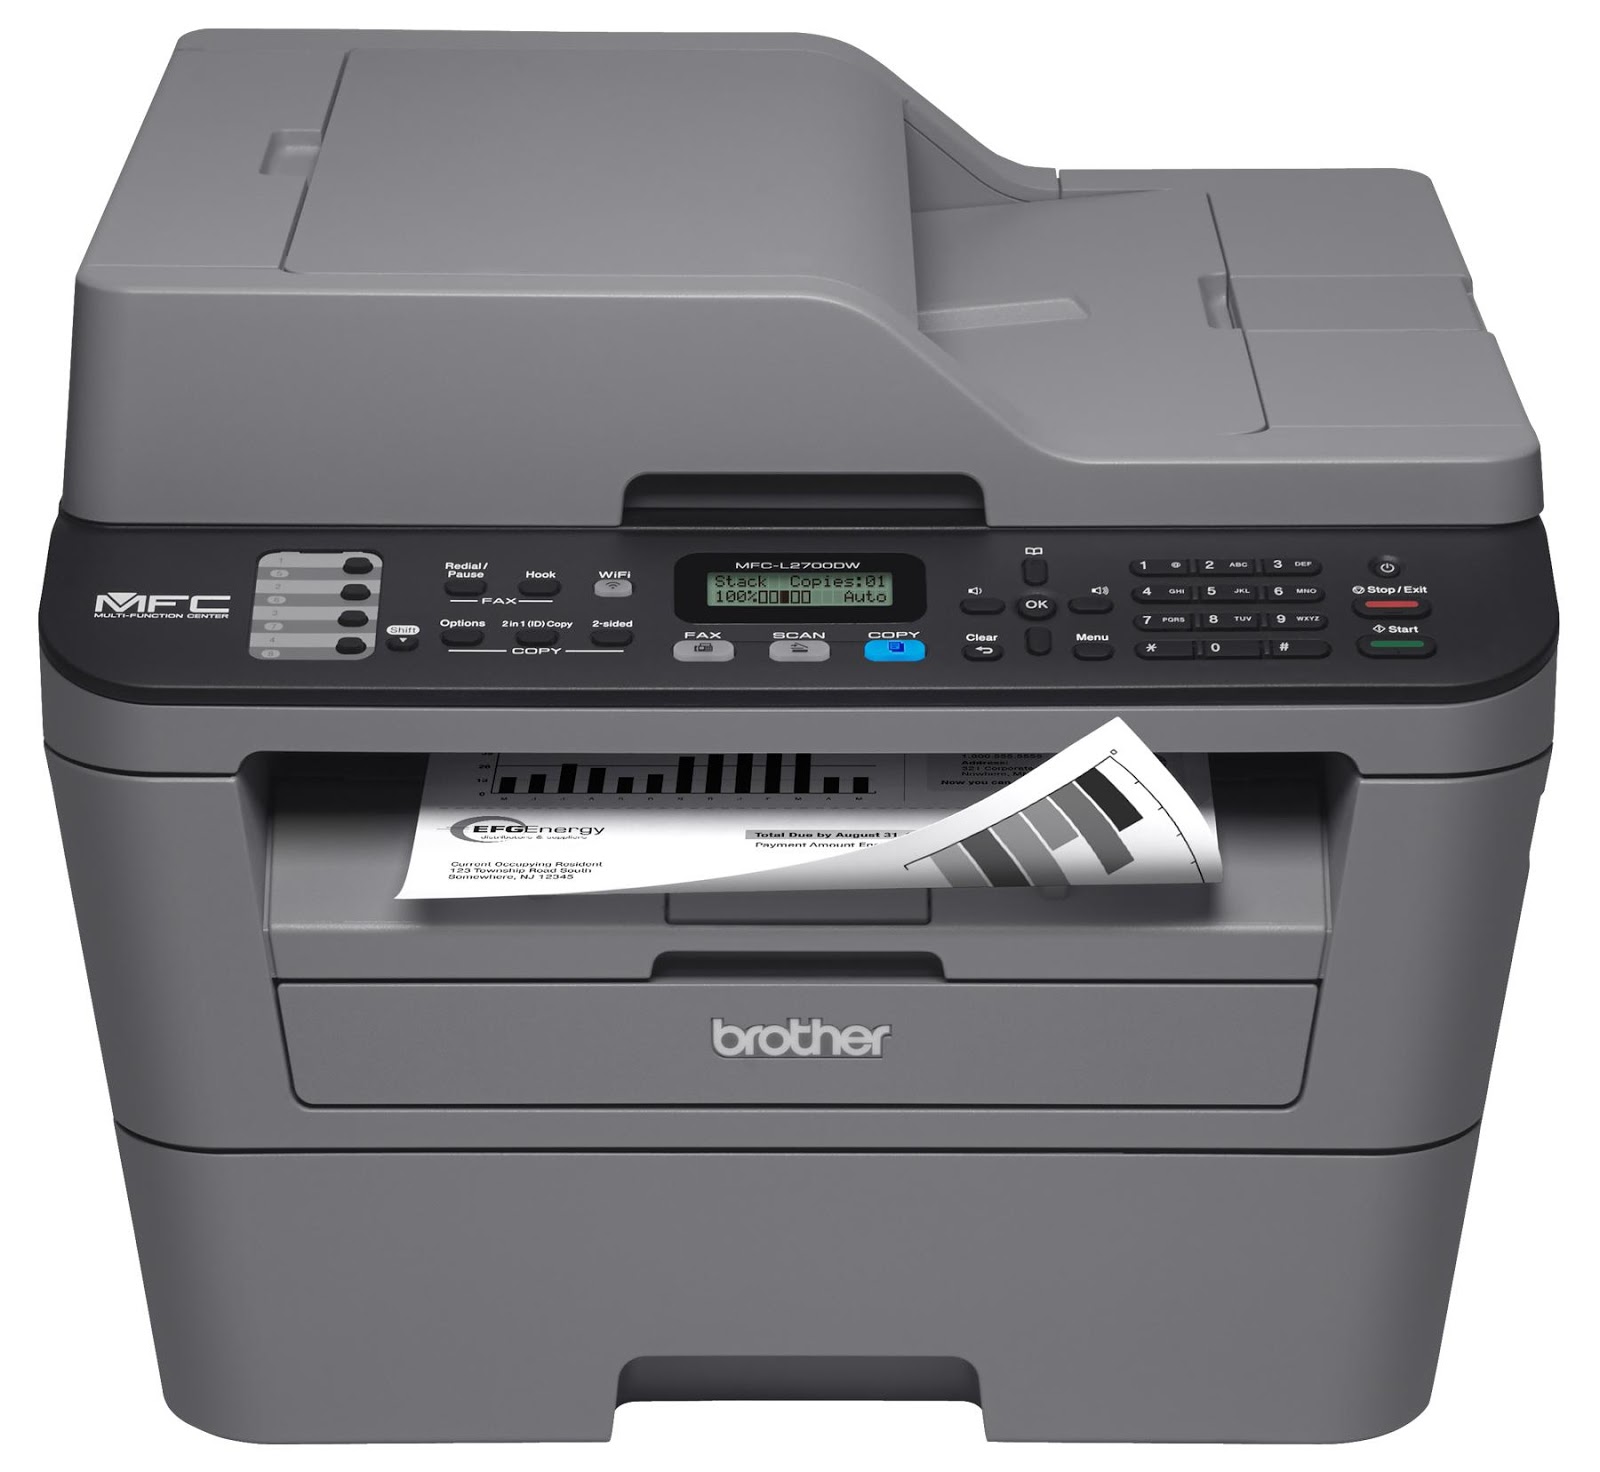 Where can you find Brother printer drivers for Windows XP?